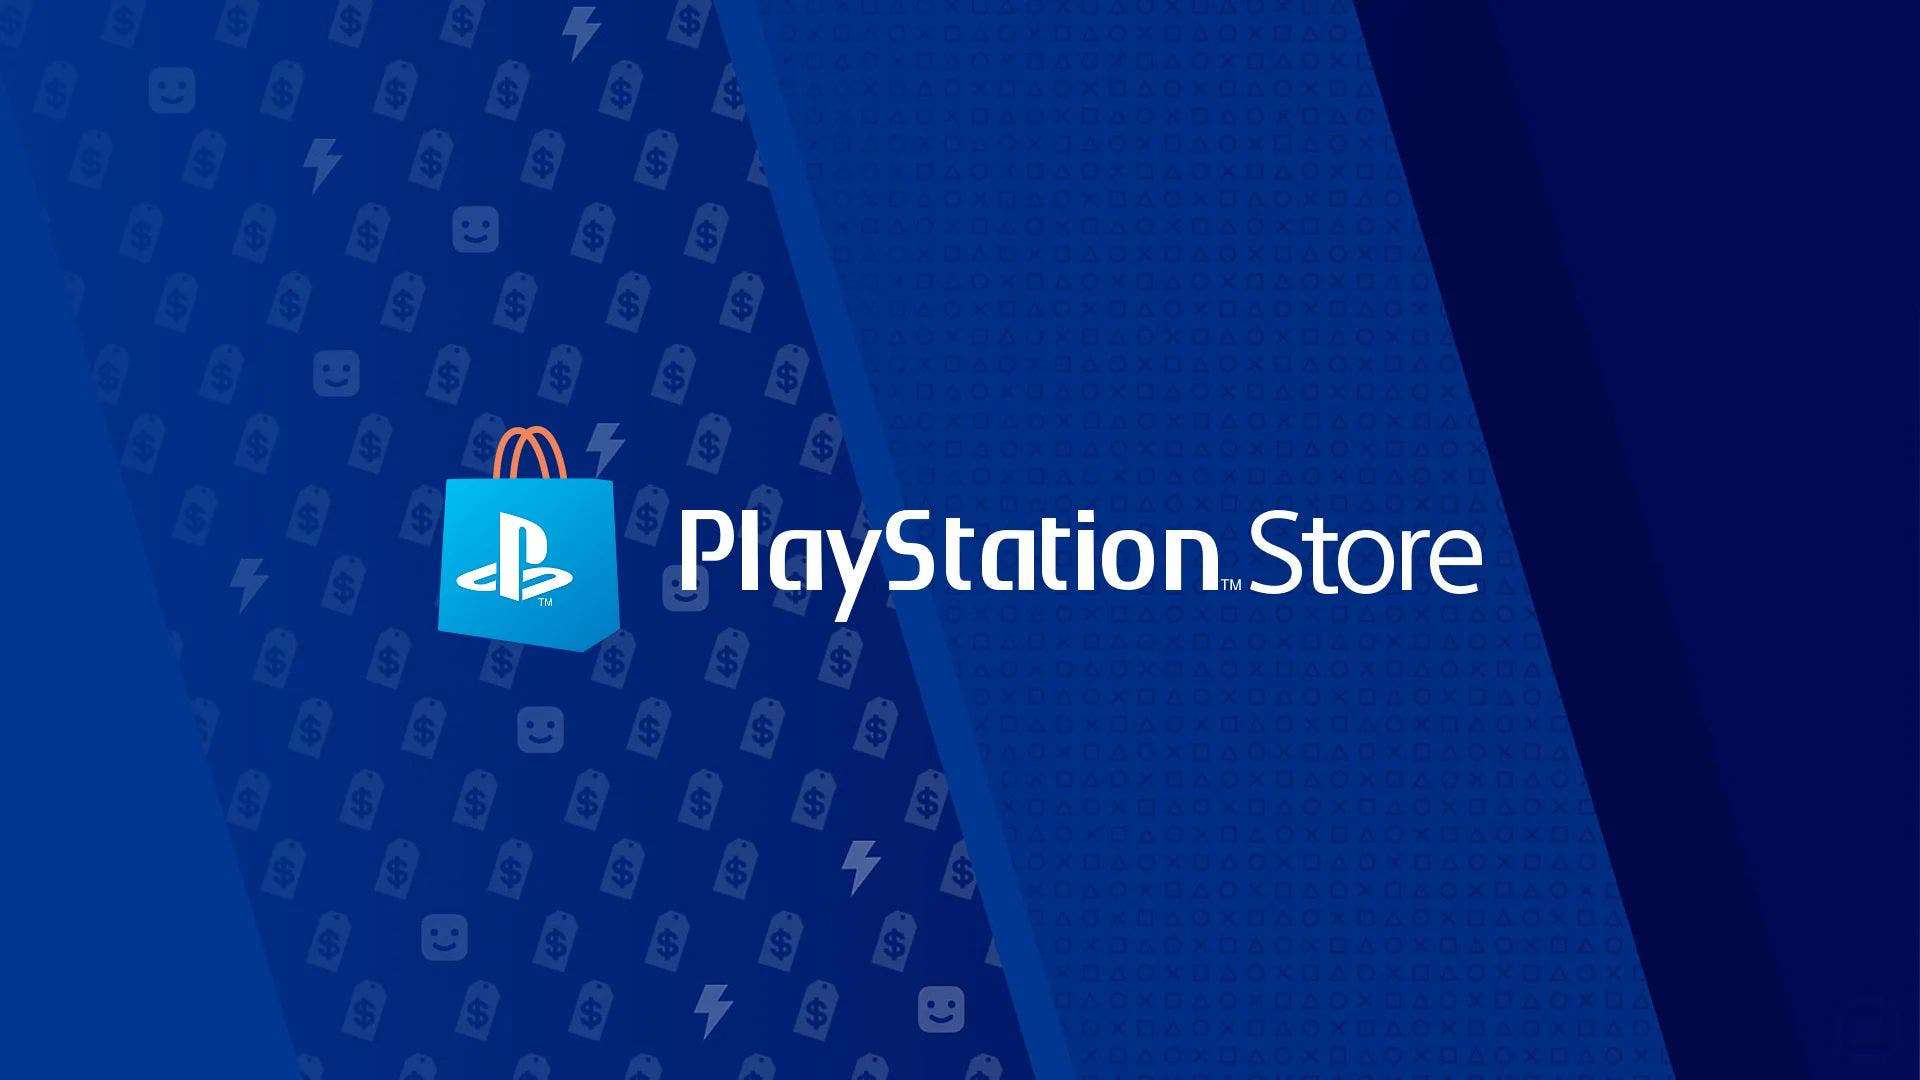 New payment policies will change how you buy digital PS3 and Vita games